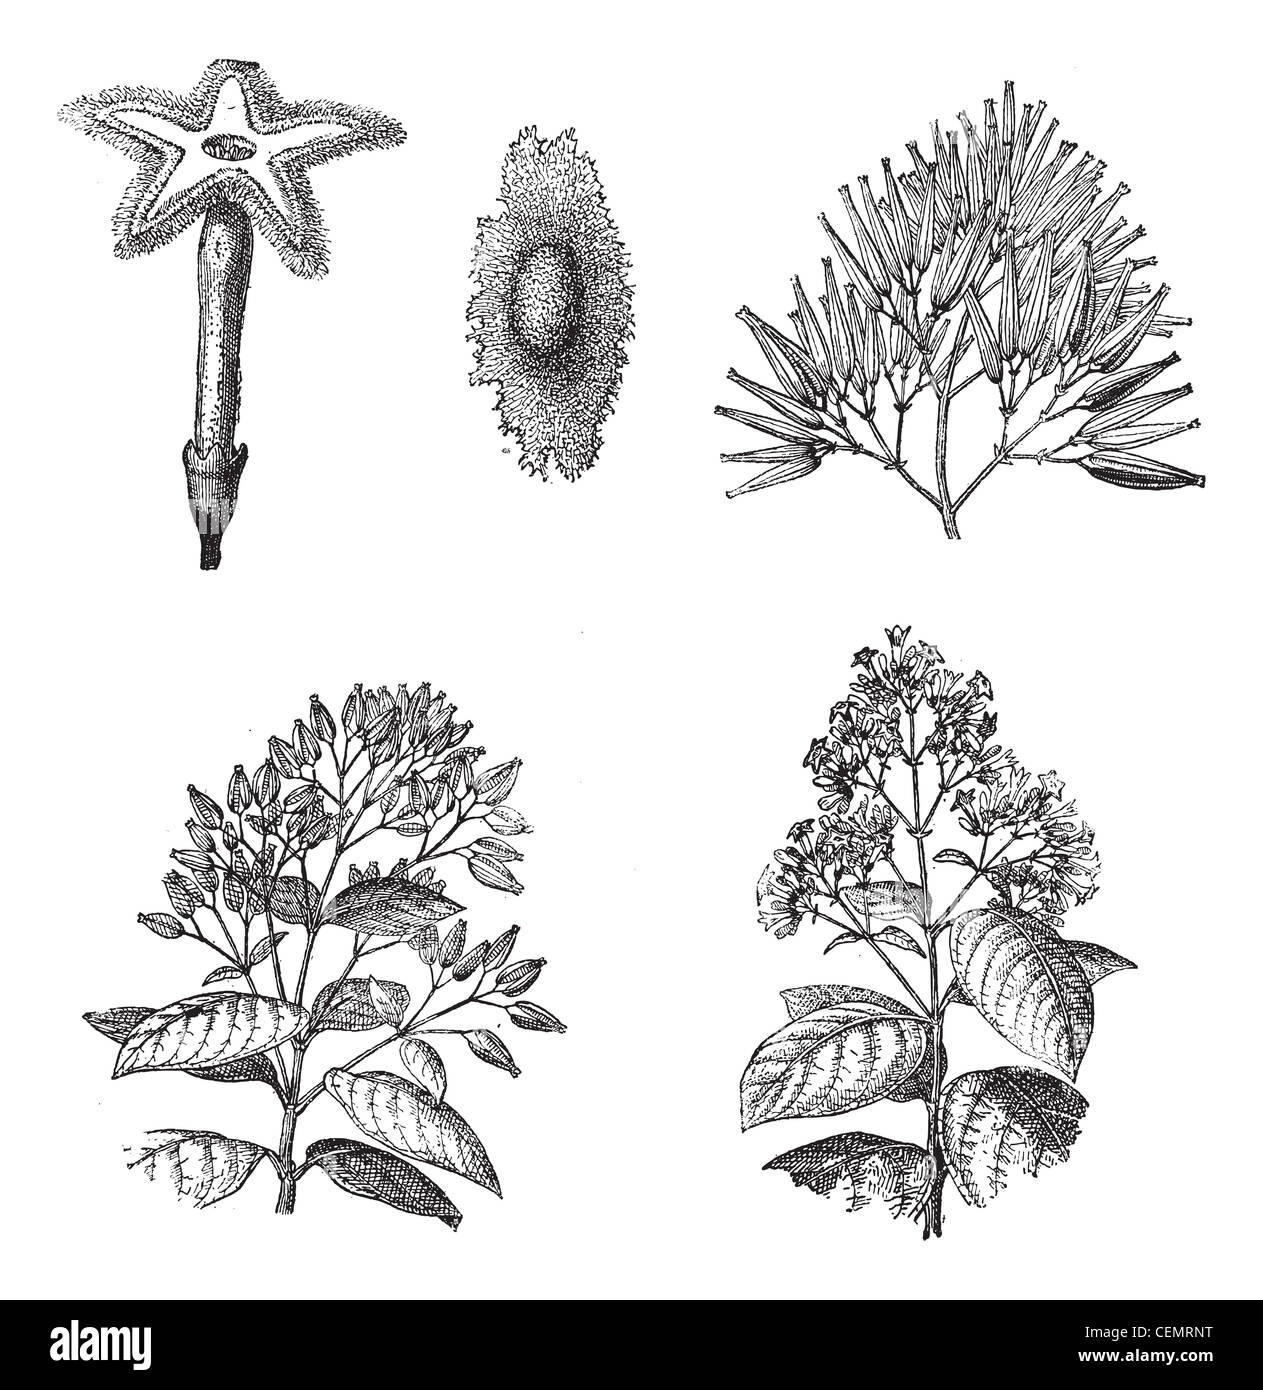 Old engraved illustration of three different species of Cinchona plant, 1,2) Flower and seed of Cinchona Calisaya, 3) Fruits of Cinchona Succirubra, 4,5) Flowering branches and Fruiting shoots of Cinchona officinalis are isolated on a white background. Dictionary of words and things - Larive and Fleury ? 1895 Stock Photo